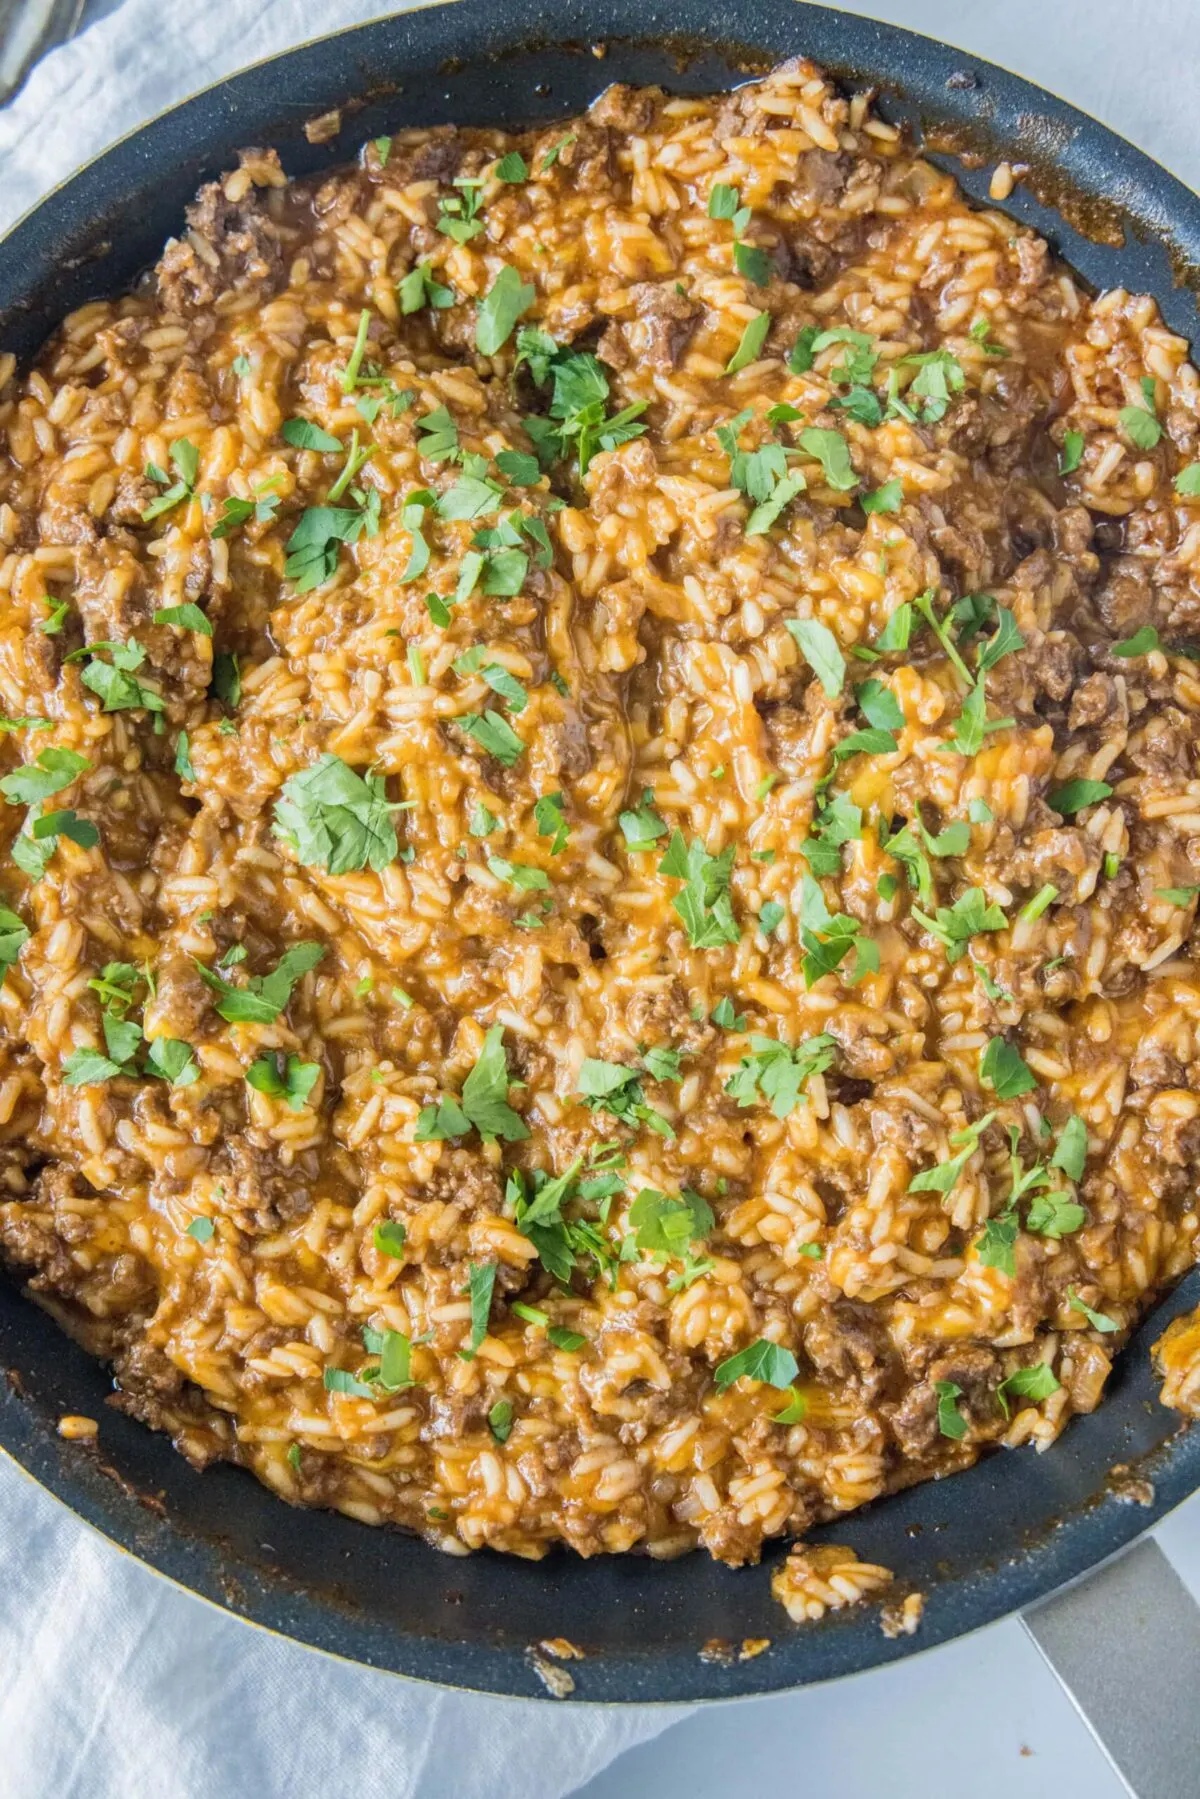 Overhead view of a skillet filled with beefy taco rice, topped with cilantro